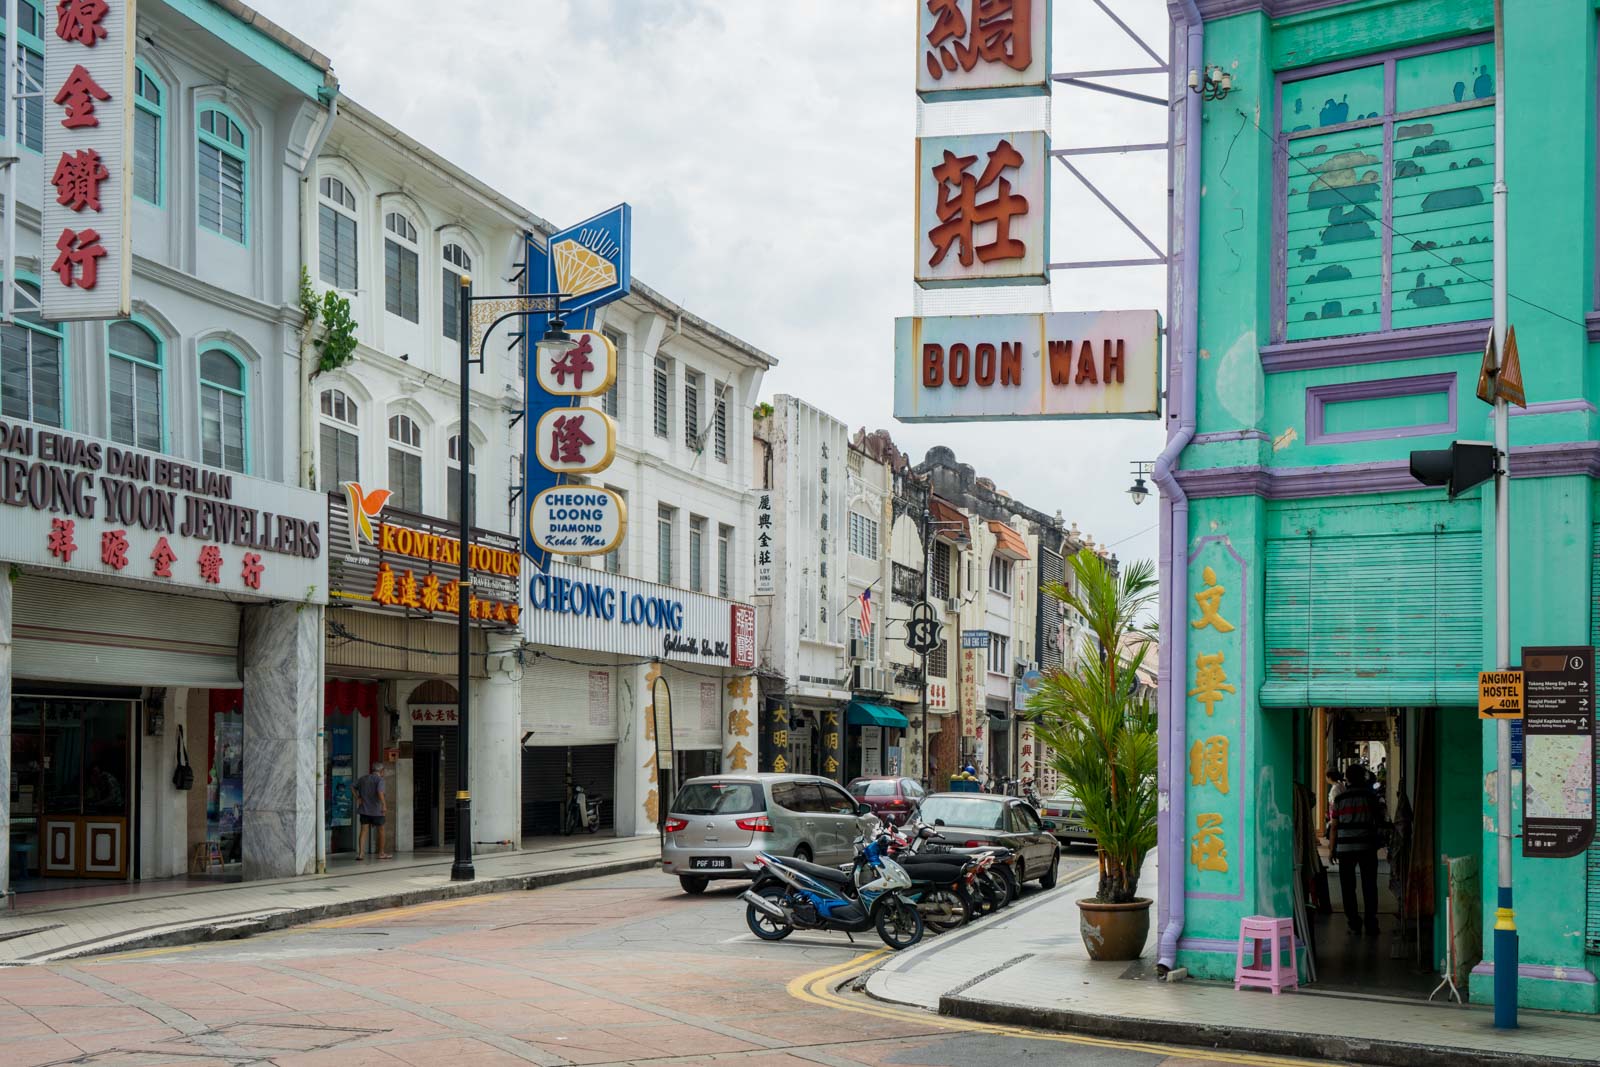 A guide to all the heritage sites to see in George Town, Penang, Malaysia